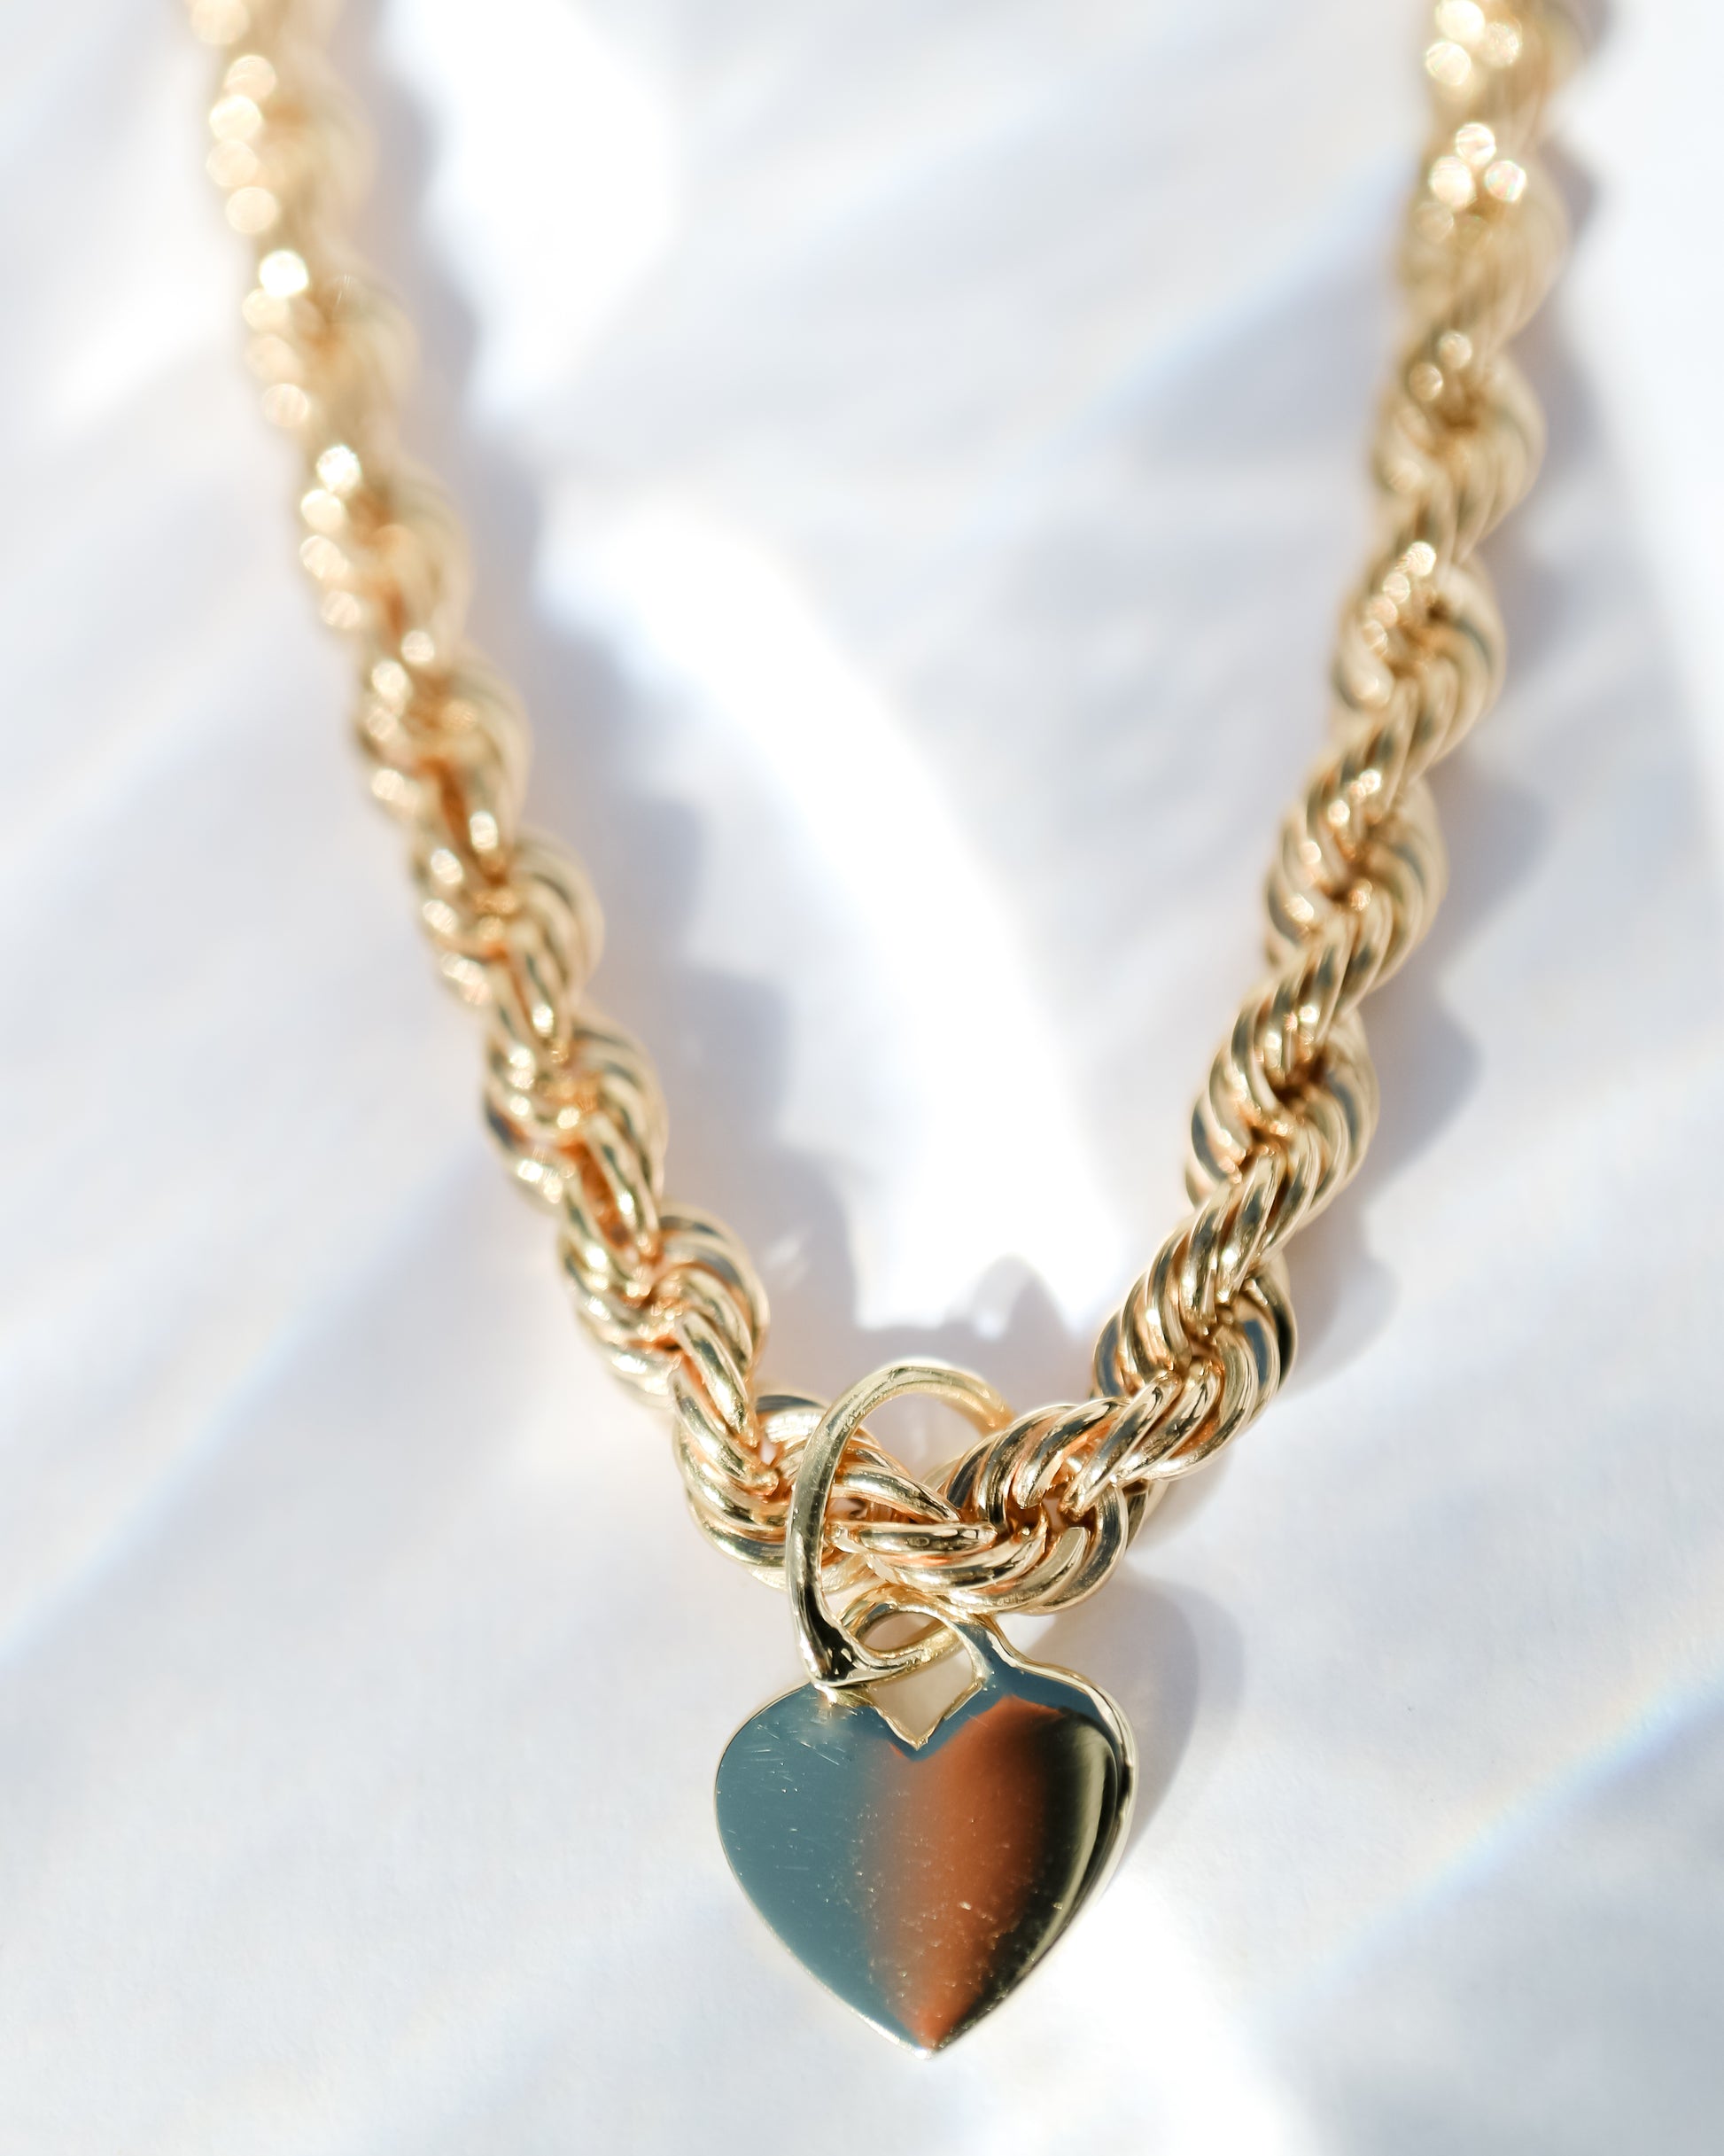 9ct gold Chunky Rope Bracelet with gold heart charm